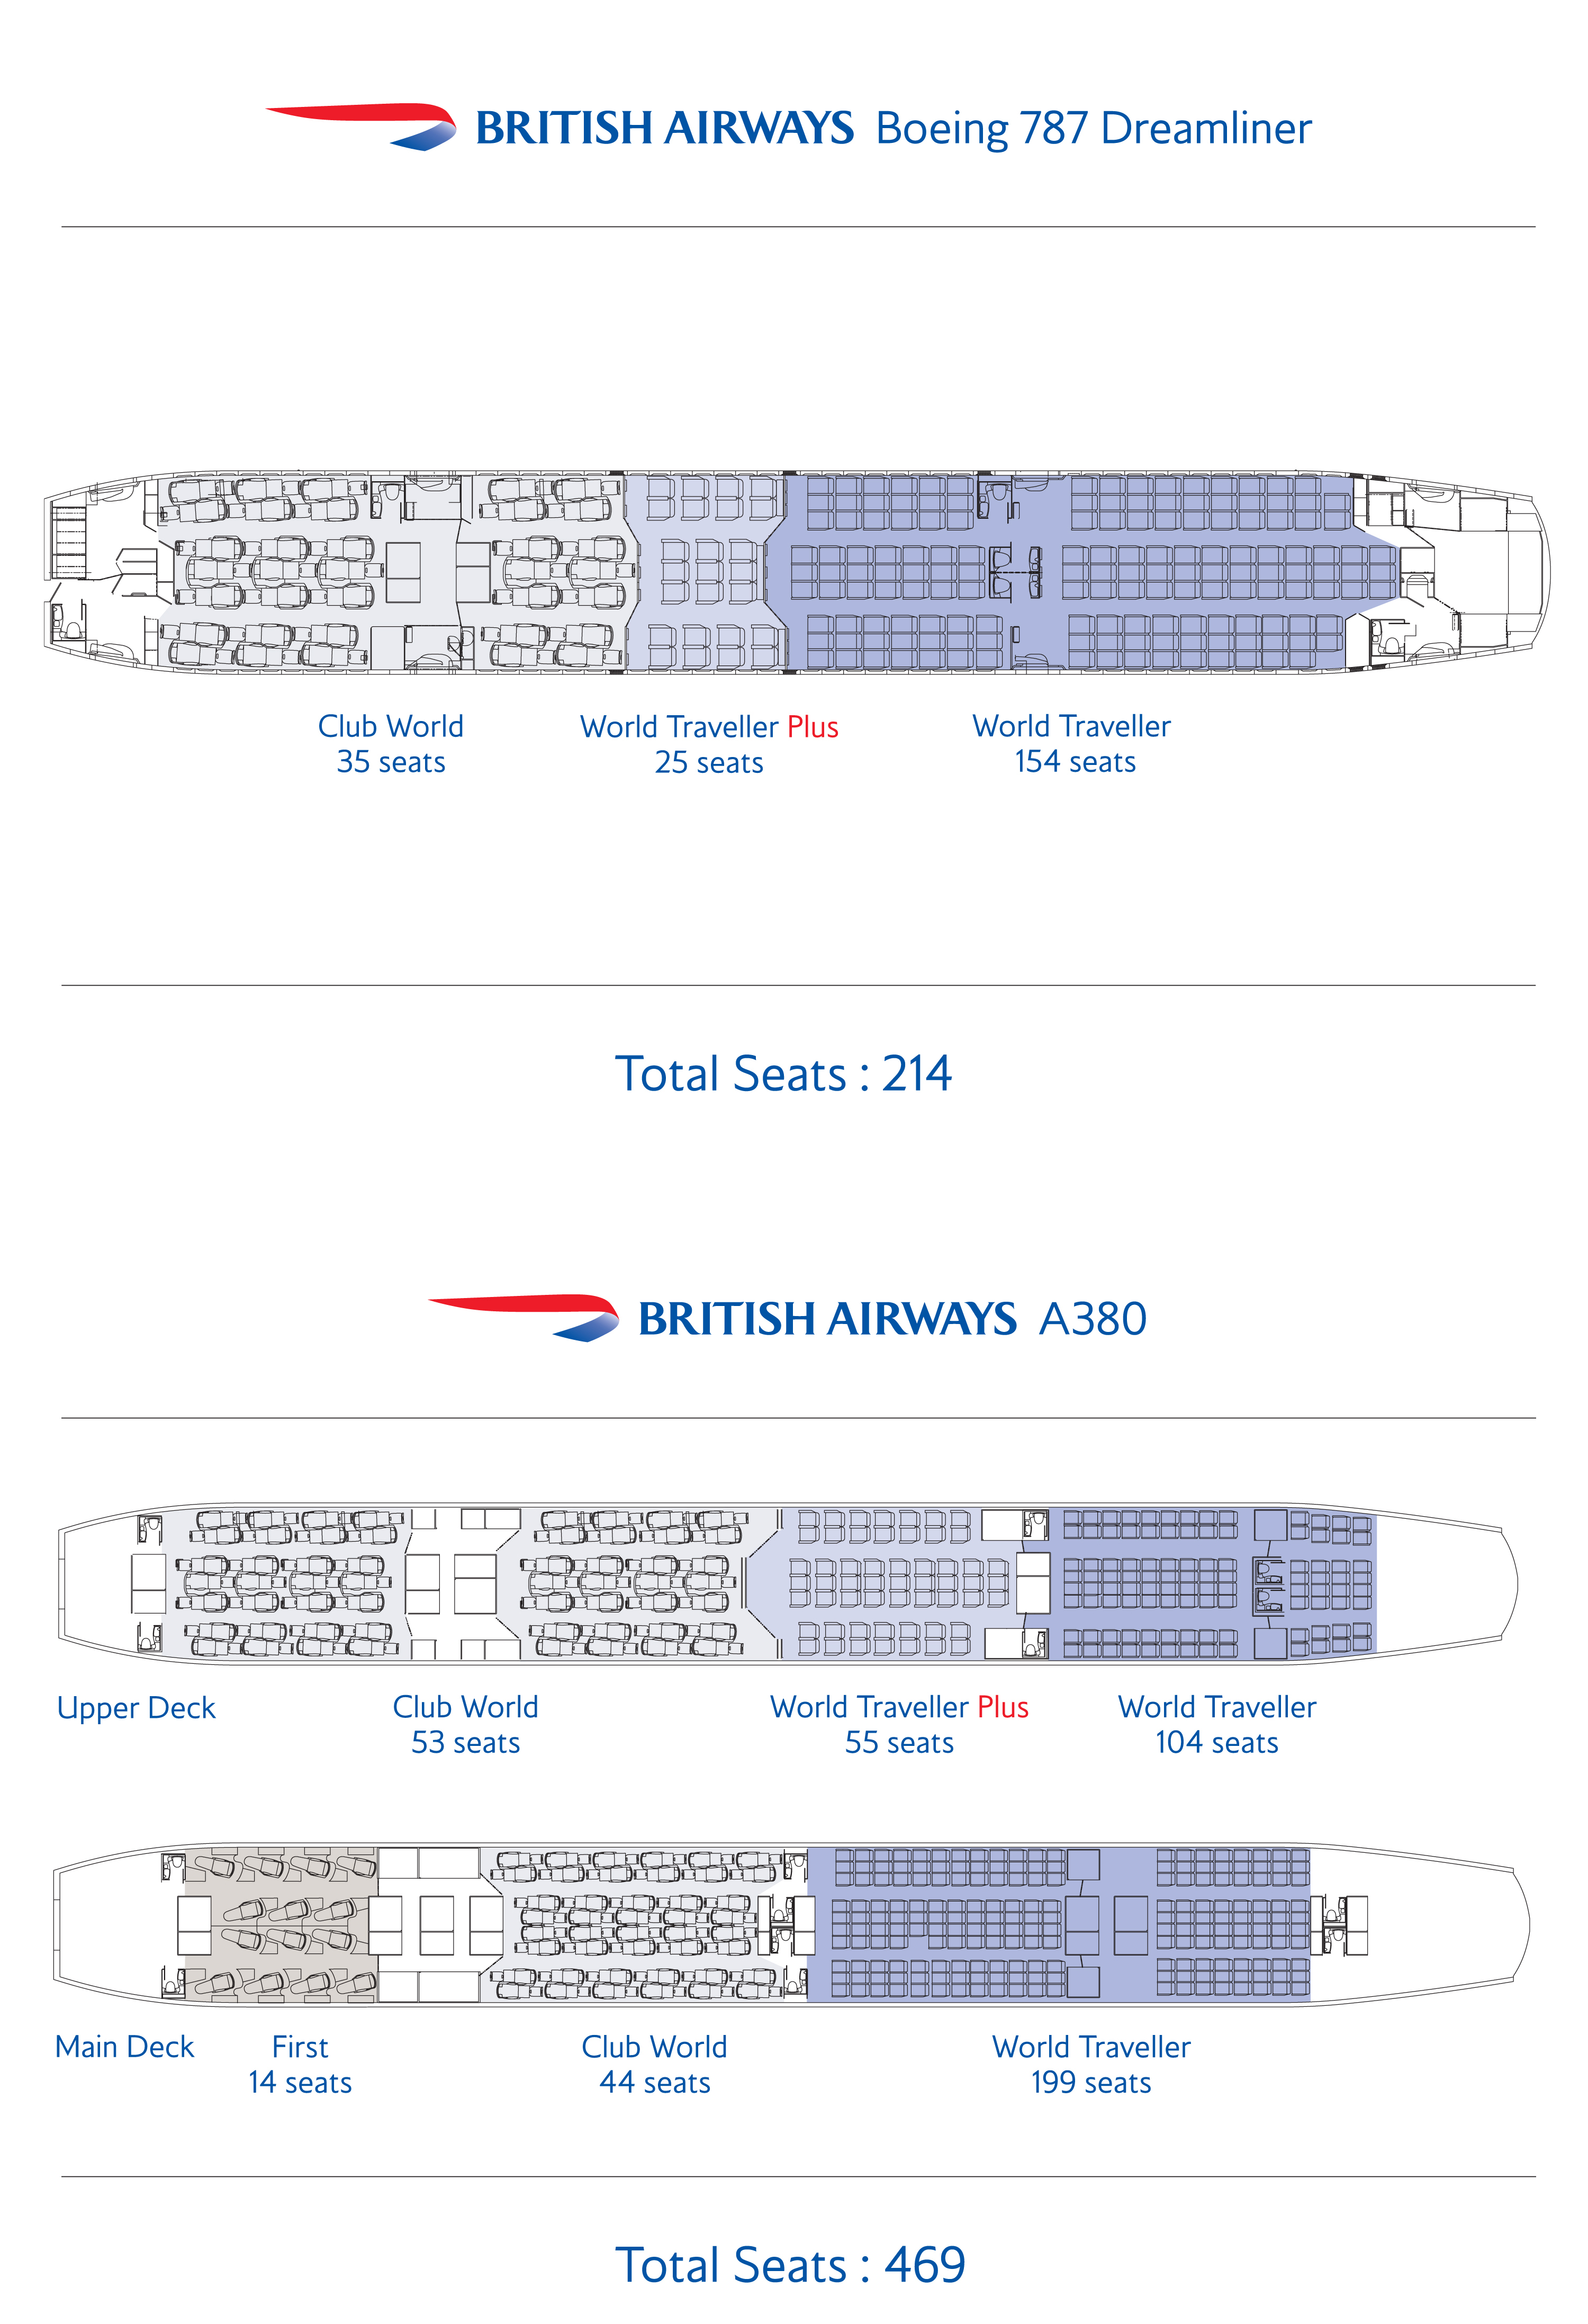 how to get seat assignments on british airways